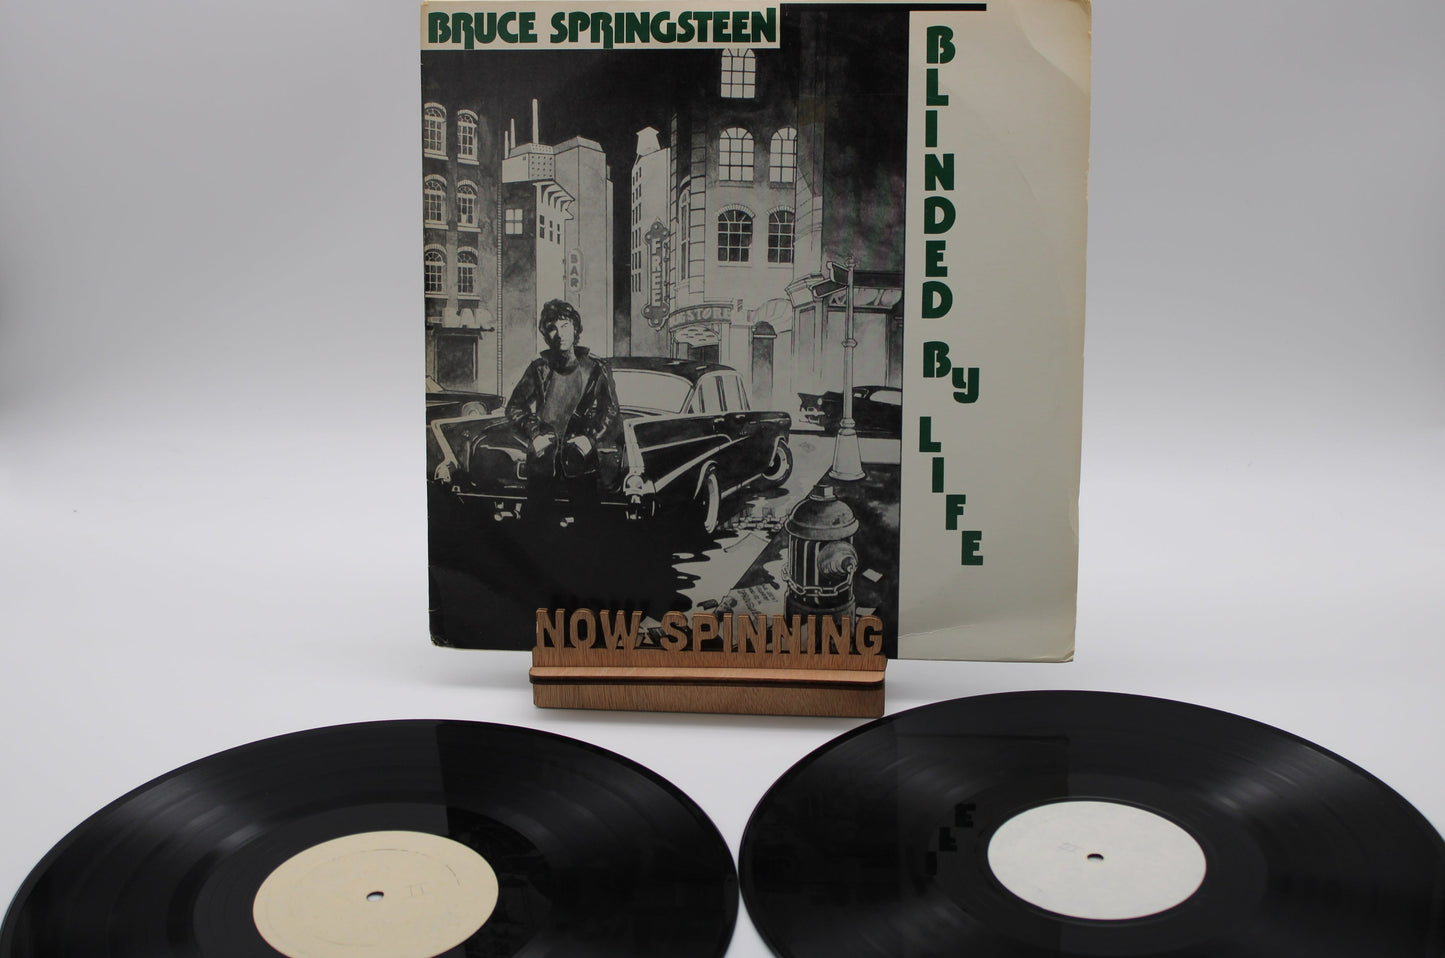 Bruce Springsteen - Blinded by Life - 2 LPs Live at Allen Theater Cleveland April 1976 BLV